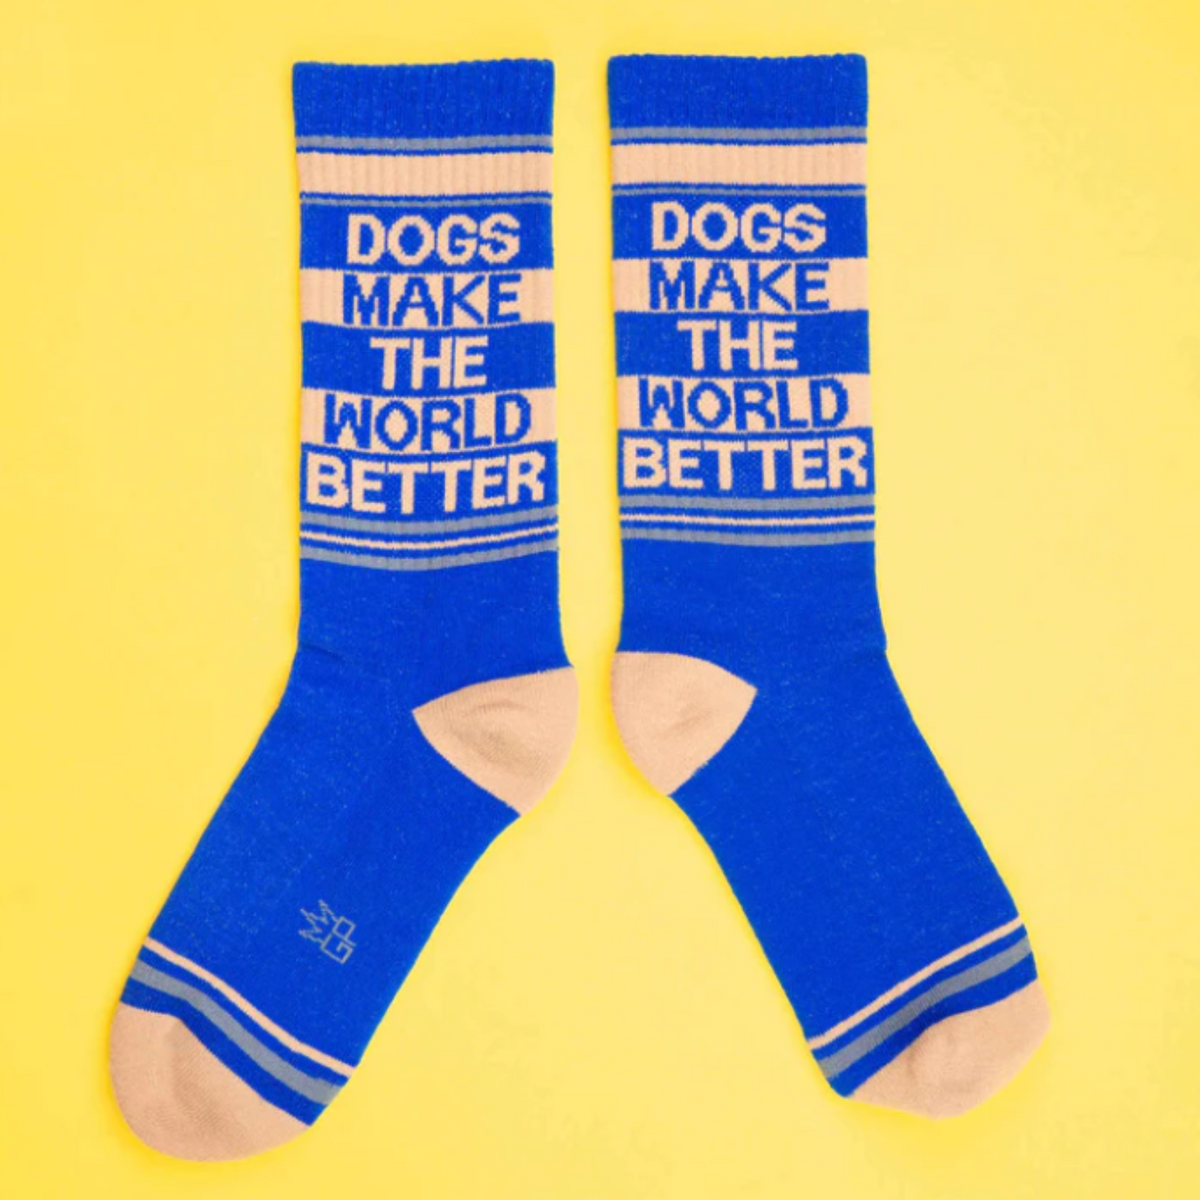 Gumball Poodle Dogs Make the World Better women&#39;s and men&#39;s sock featuring blue sock with &quot;Dogs Make the World Better&quot; in all capital letters on display